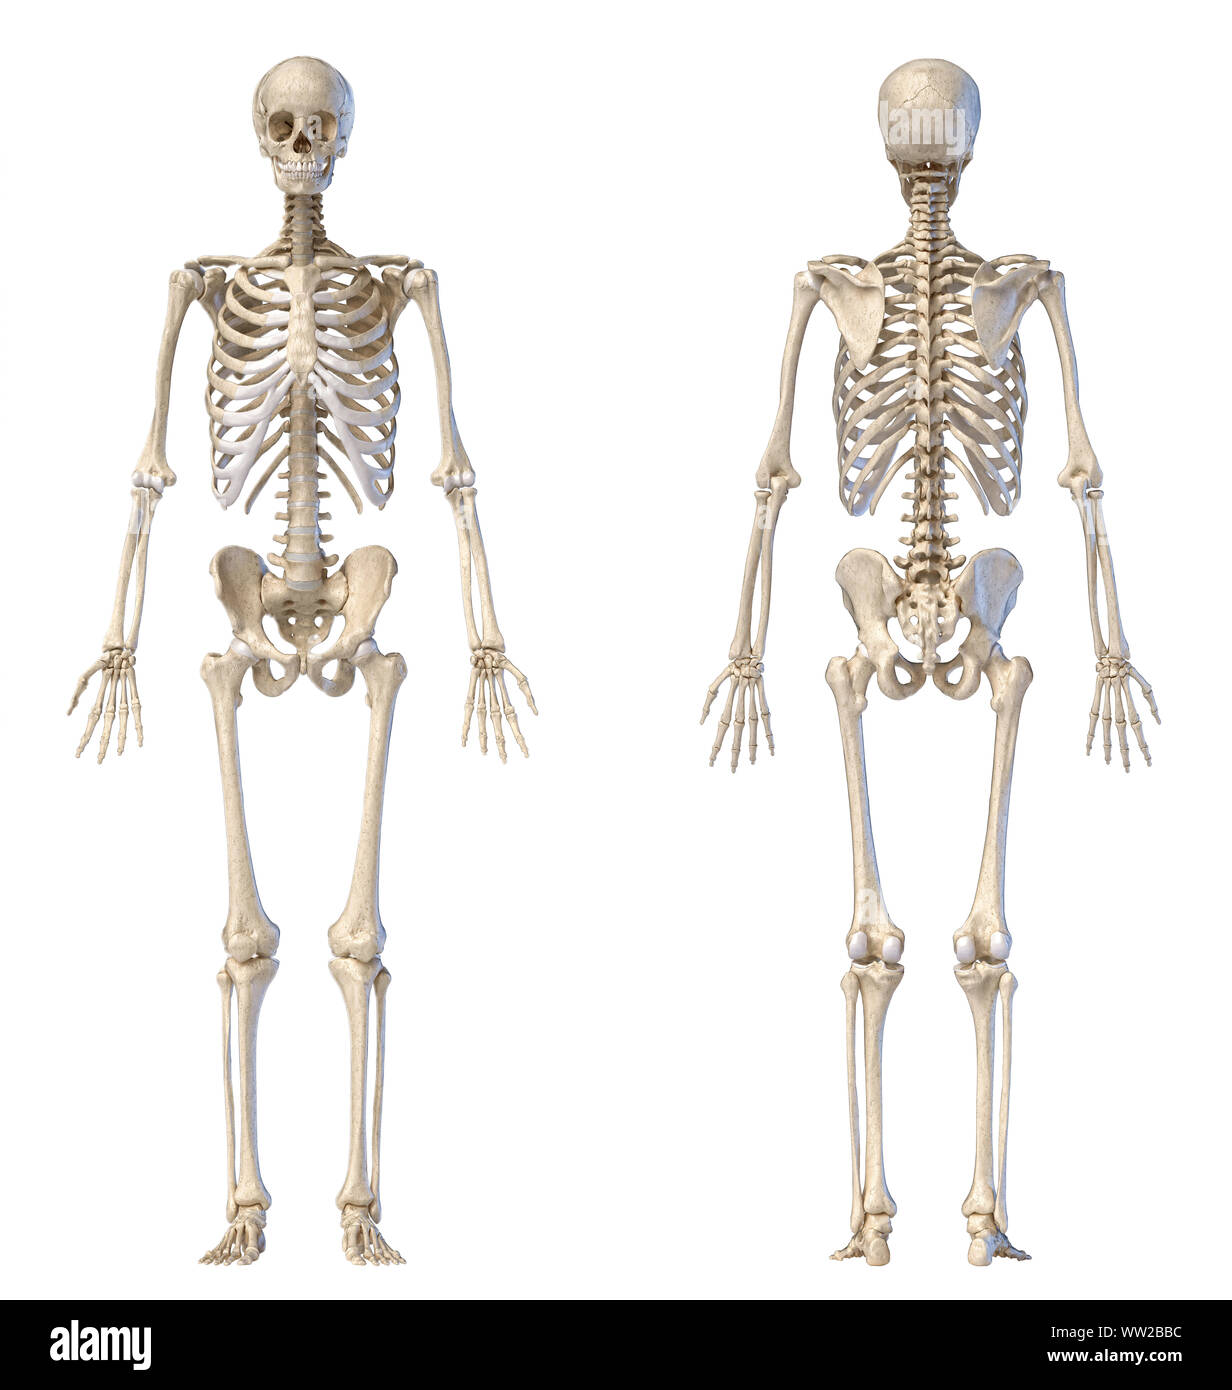 Human Anatomy full body male skeleton. Front and rear views on white background. 3d illustration. Stock Photo